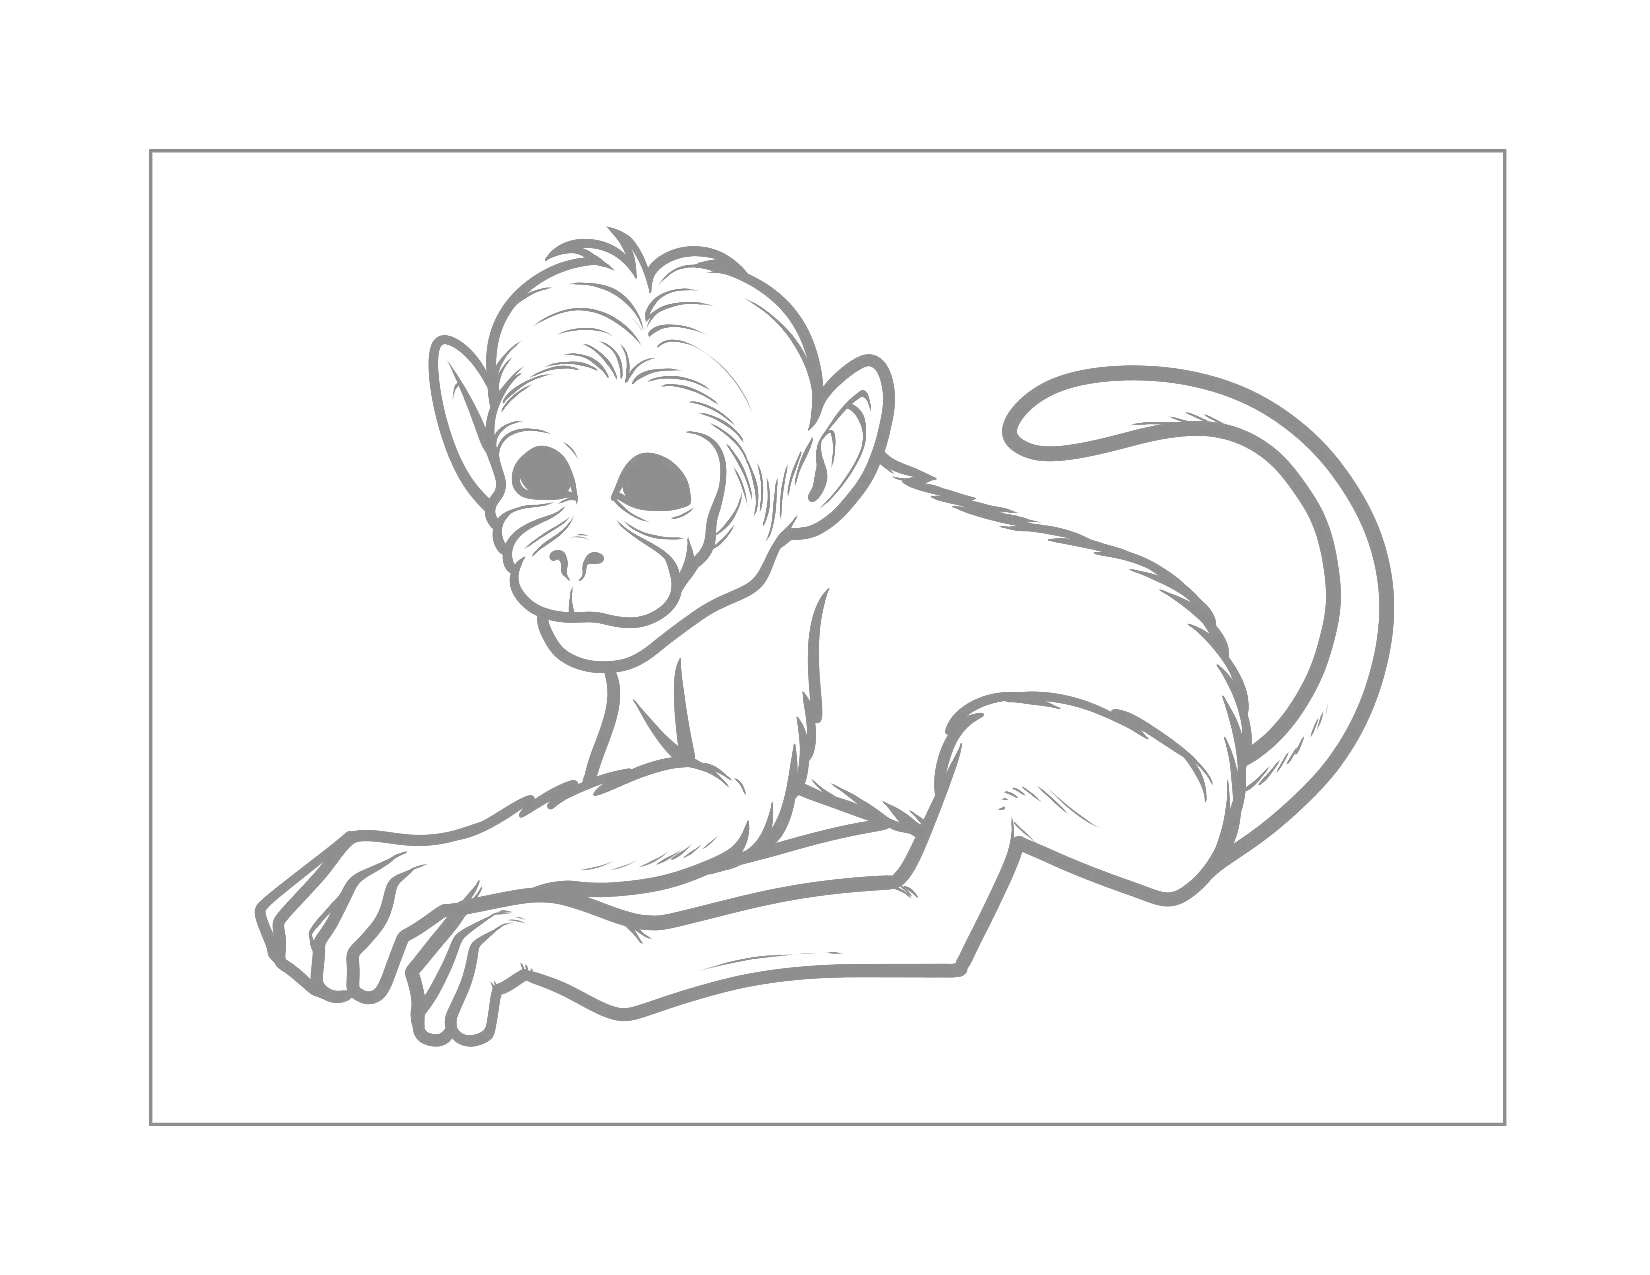 Monkey Traceable Coloring Page